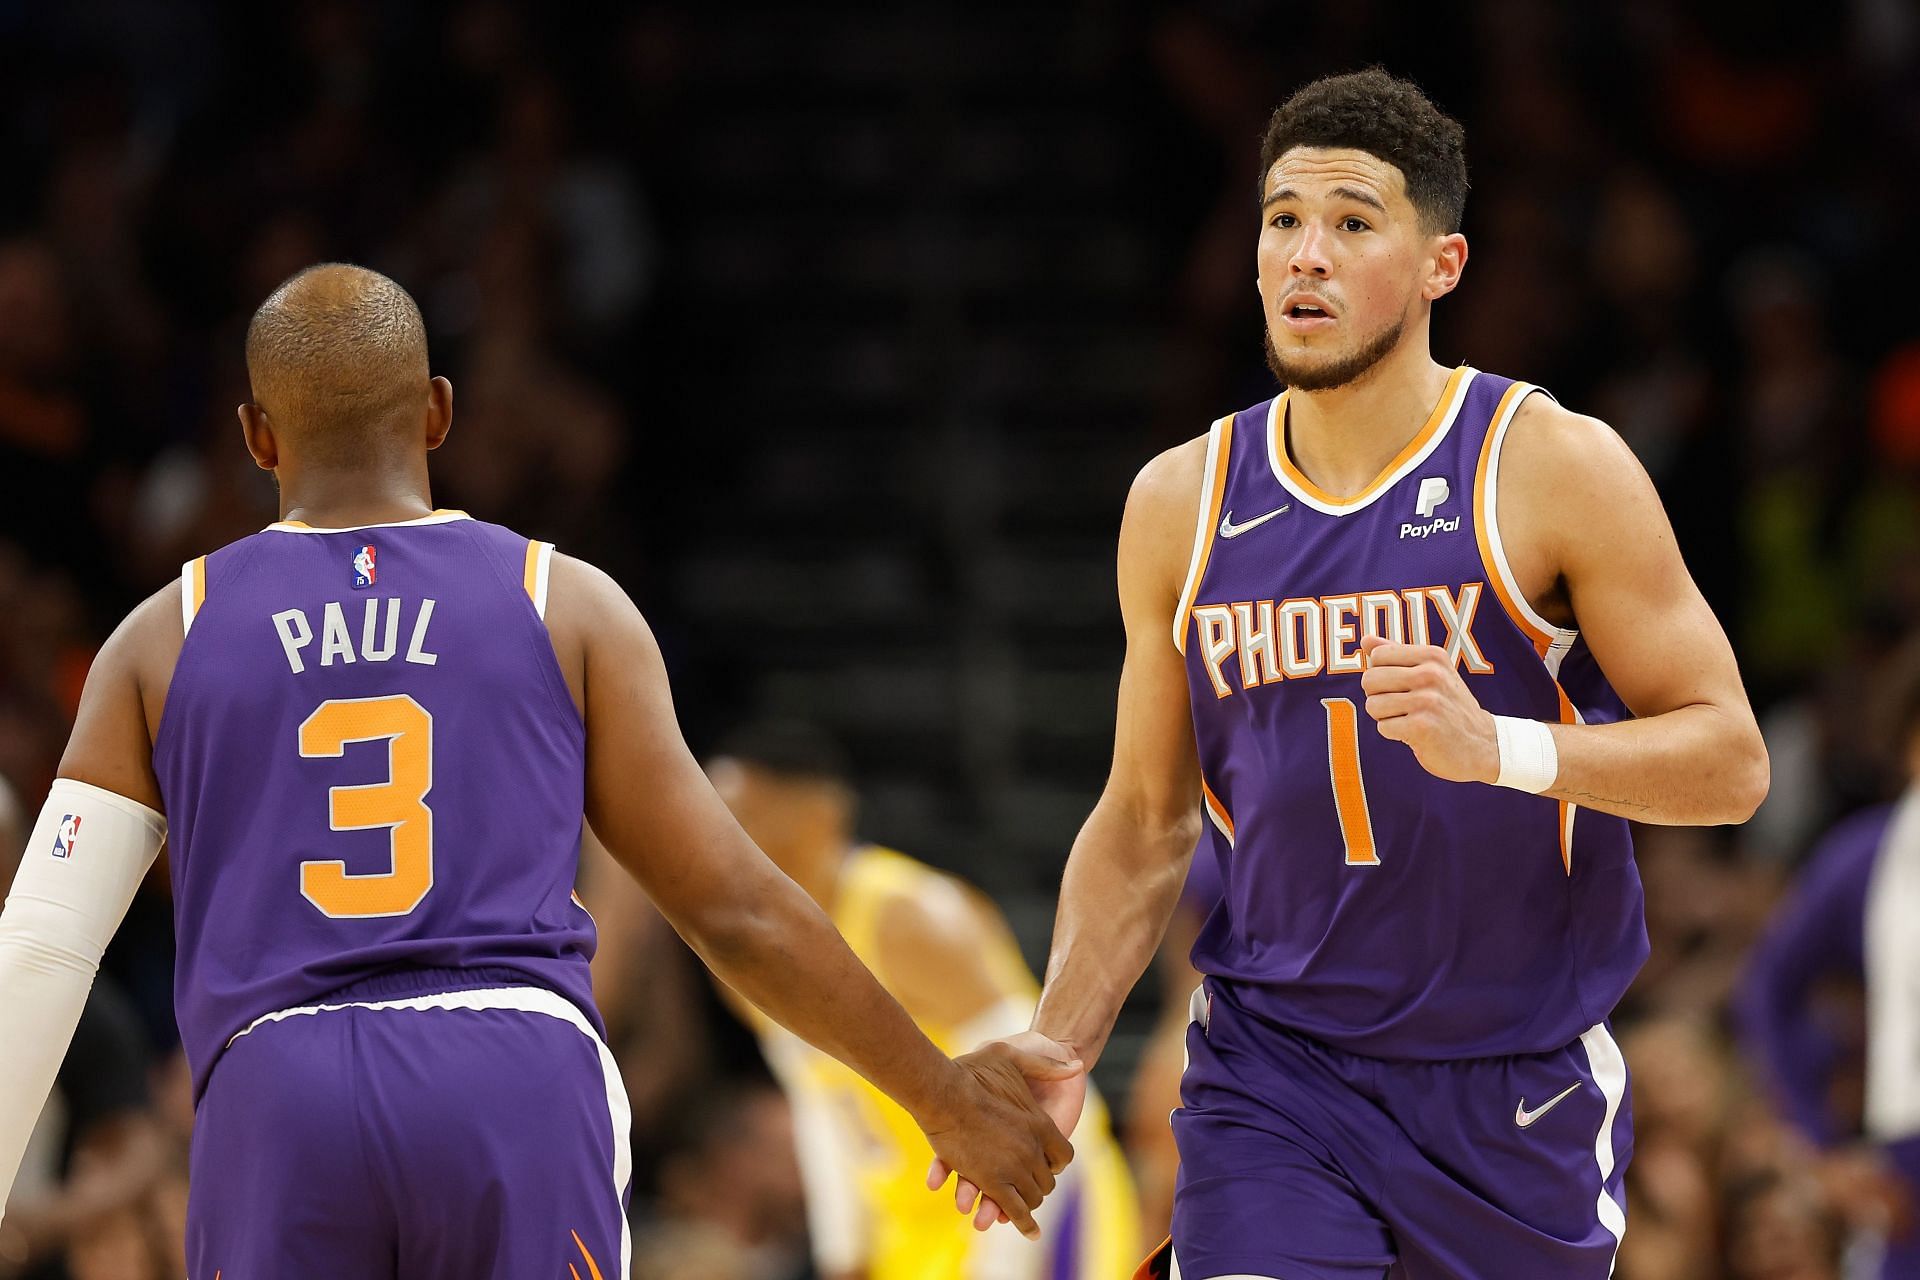 Chris Paul and Devin Booker celebrate a play.